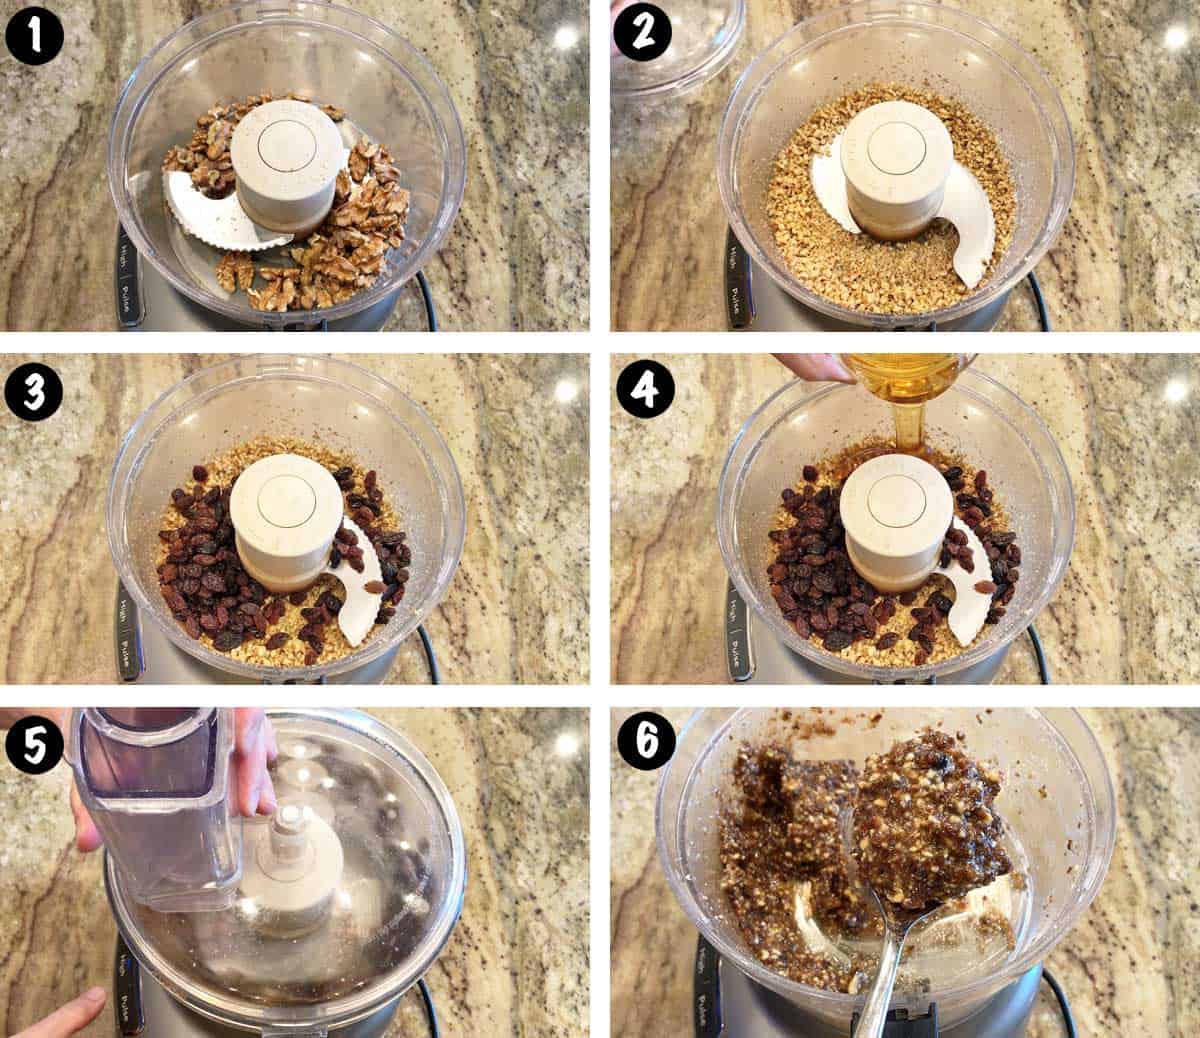 A photo collage showing the steps for making charoset.